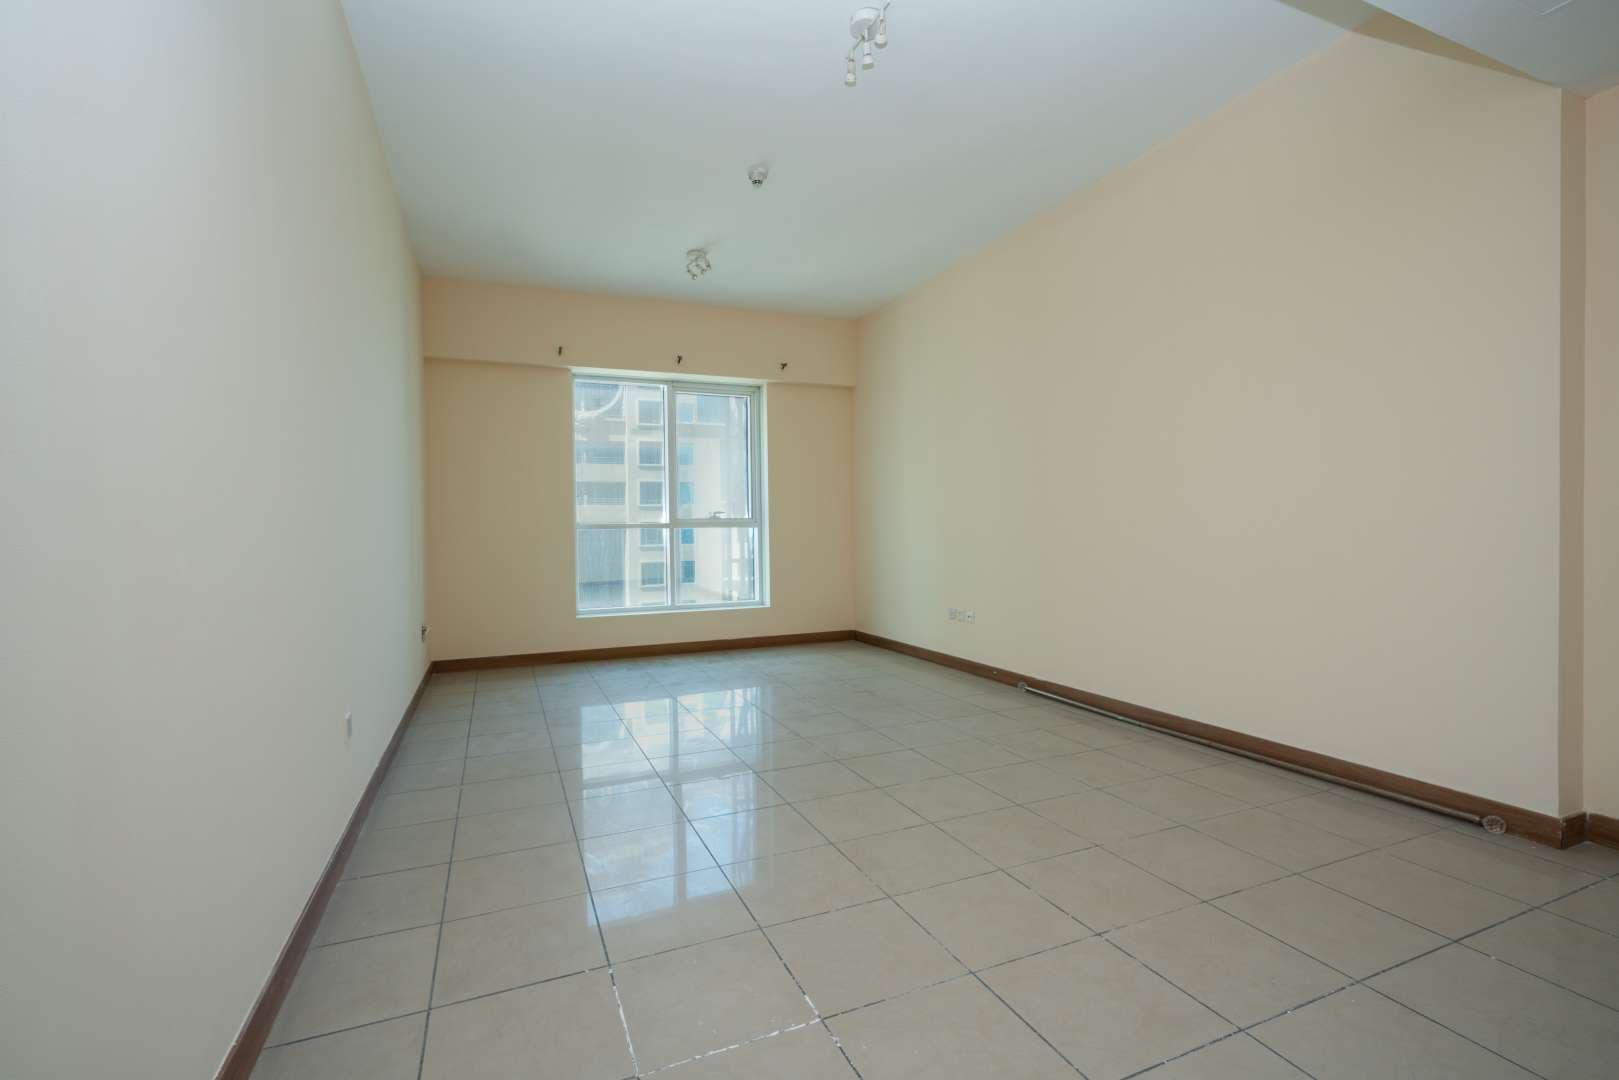 3 Bedroom Apartment For Rent Sulafa Tower Lp04976 145df558a783d200.jpg